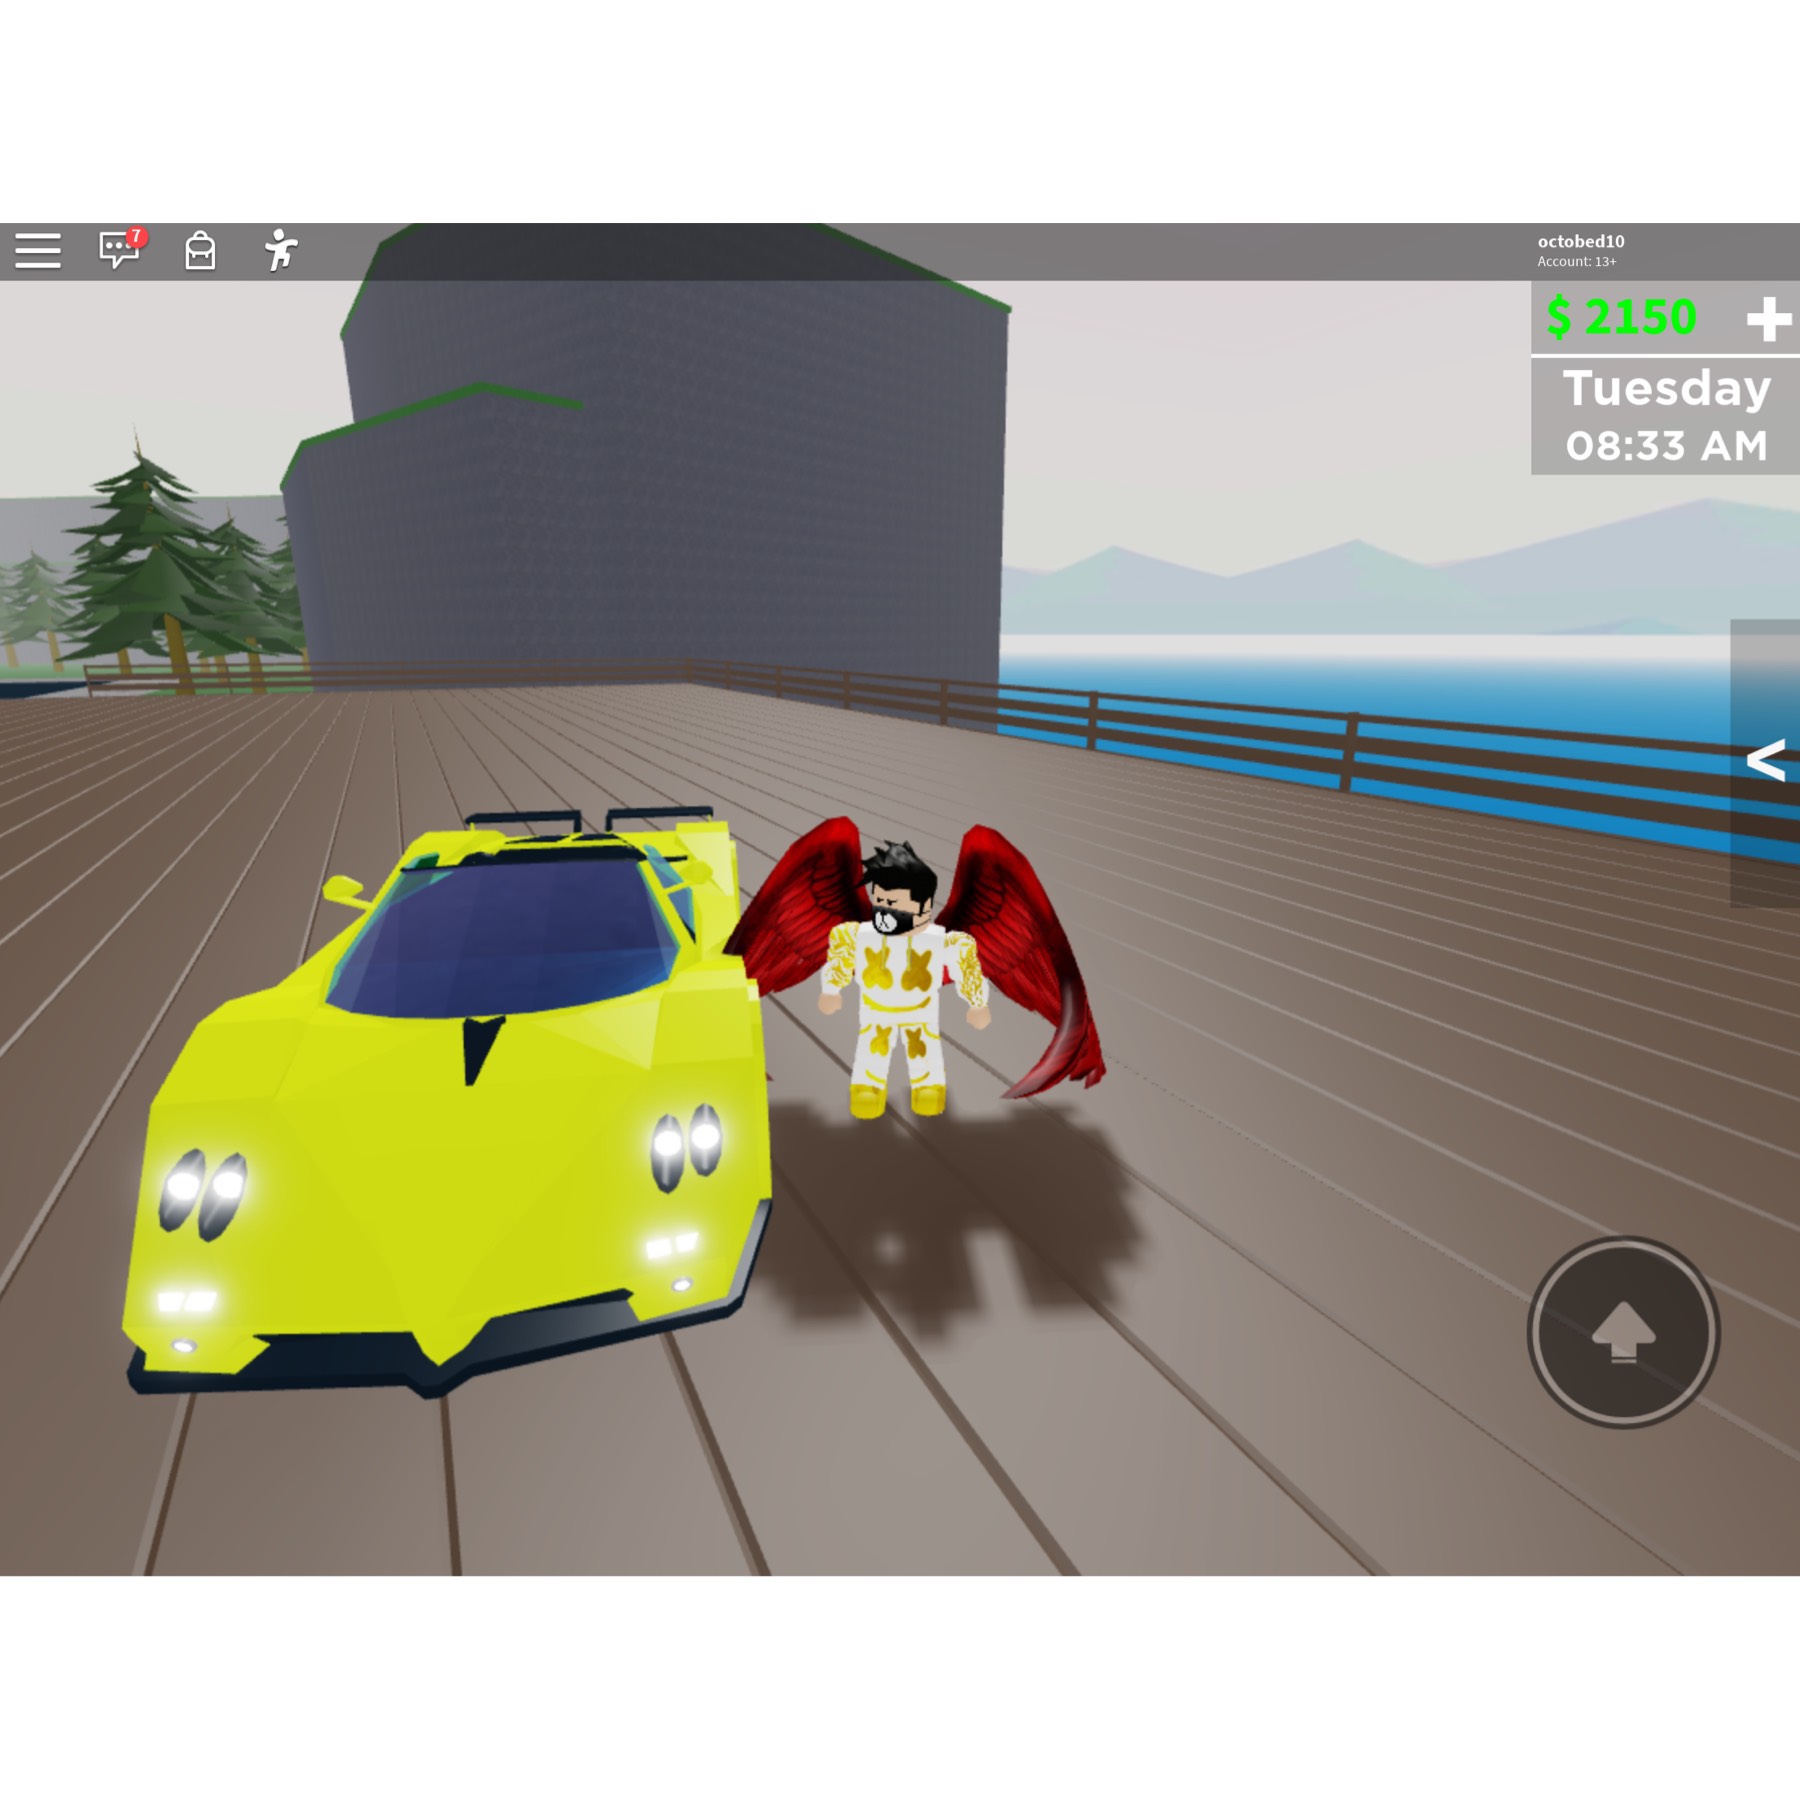 My username is October 10 come join me in roblox